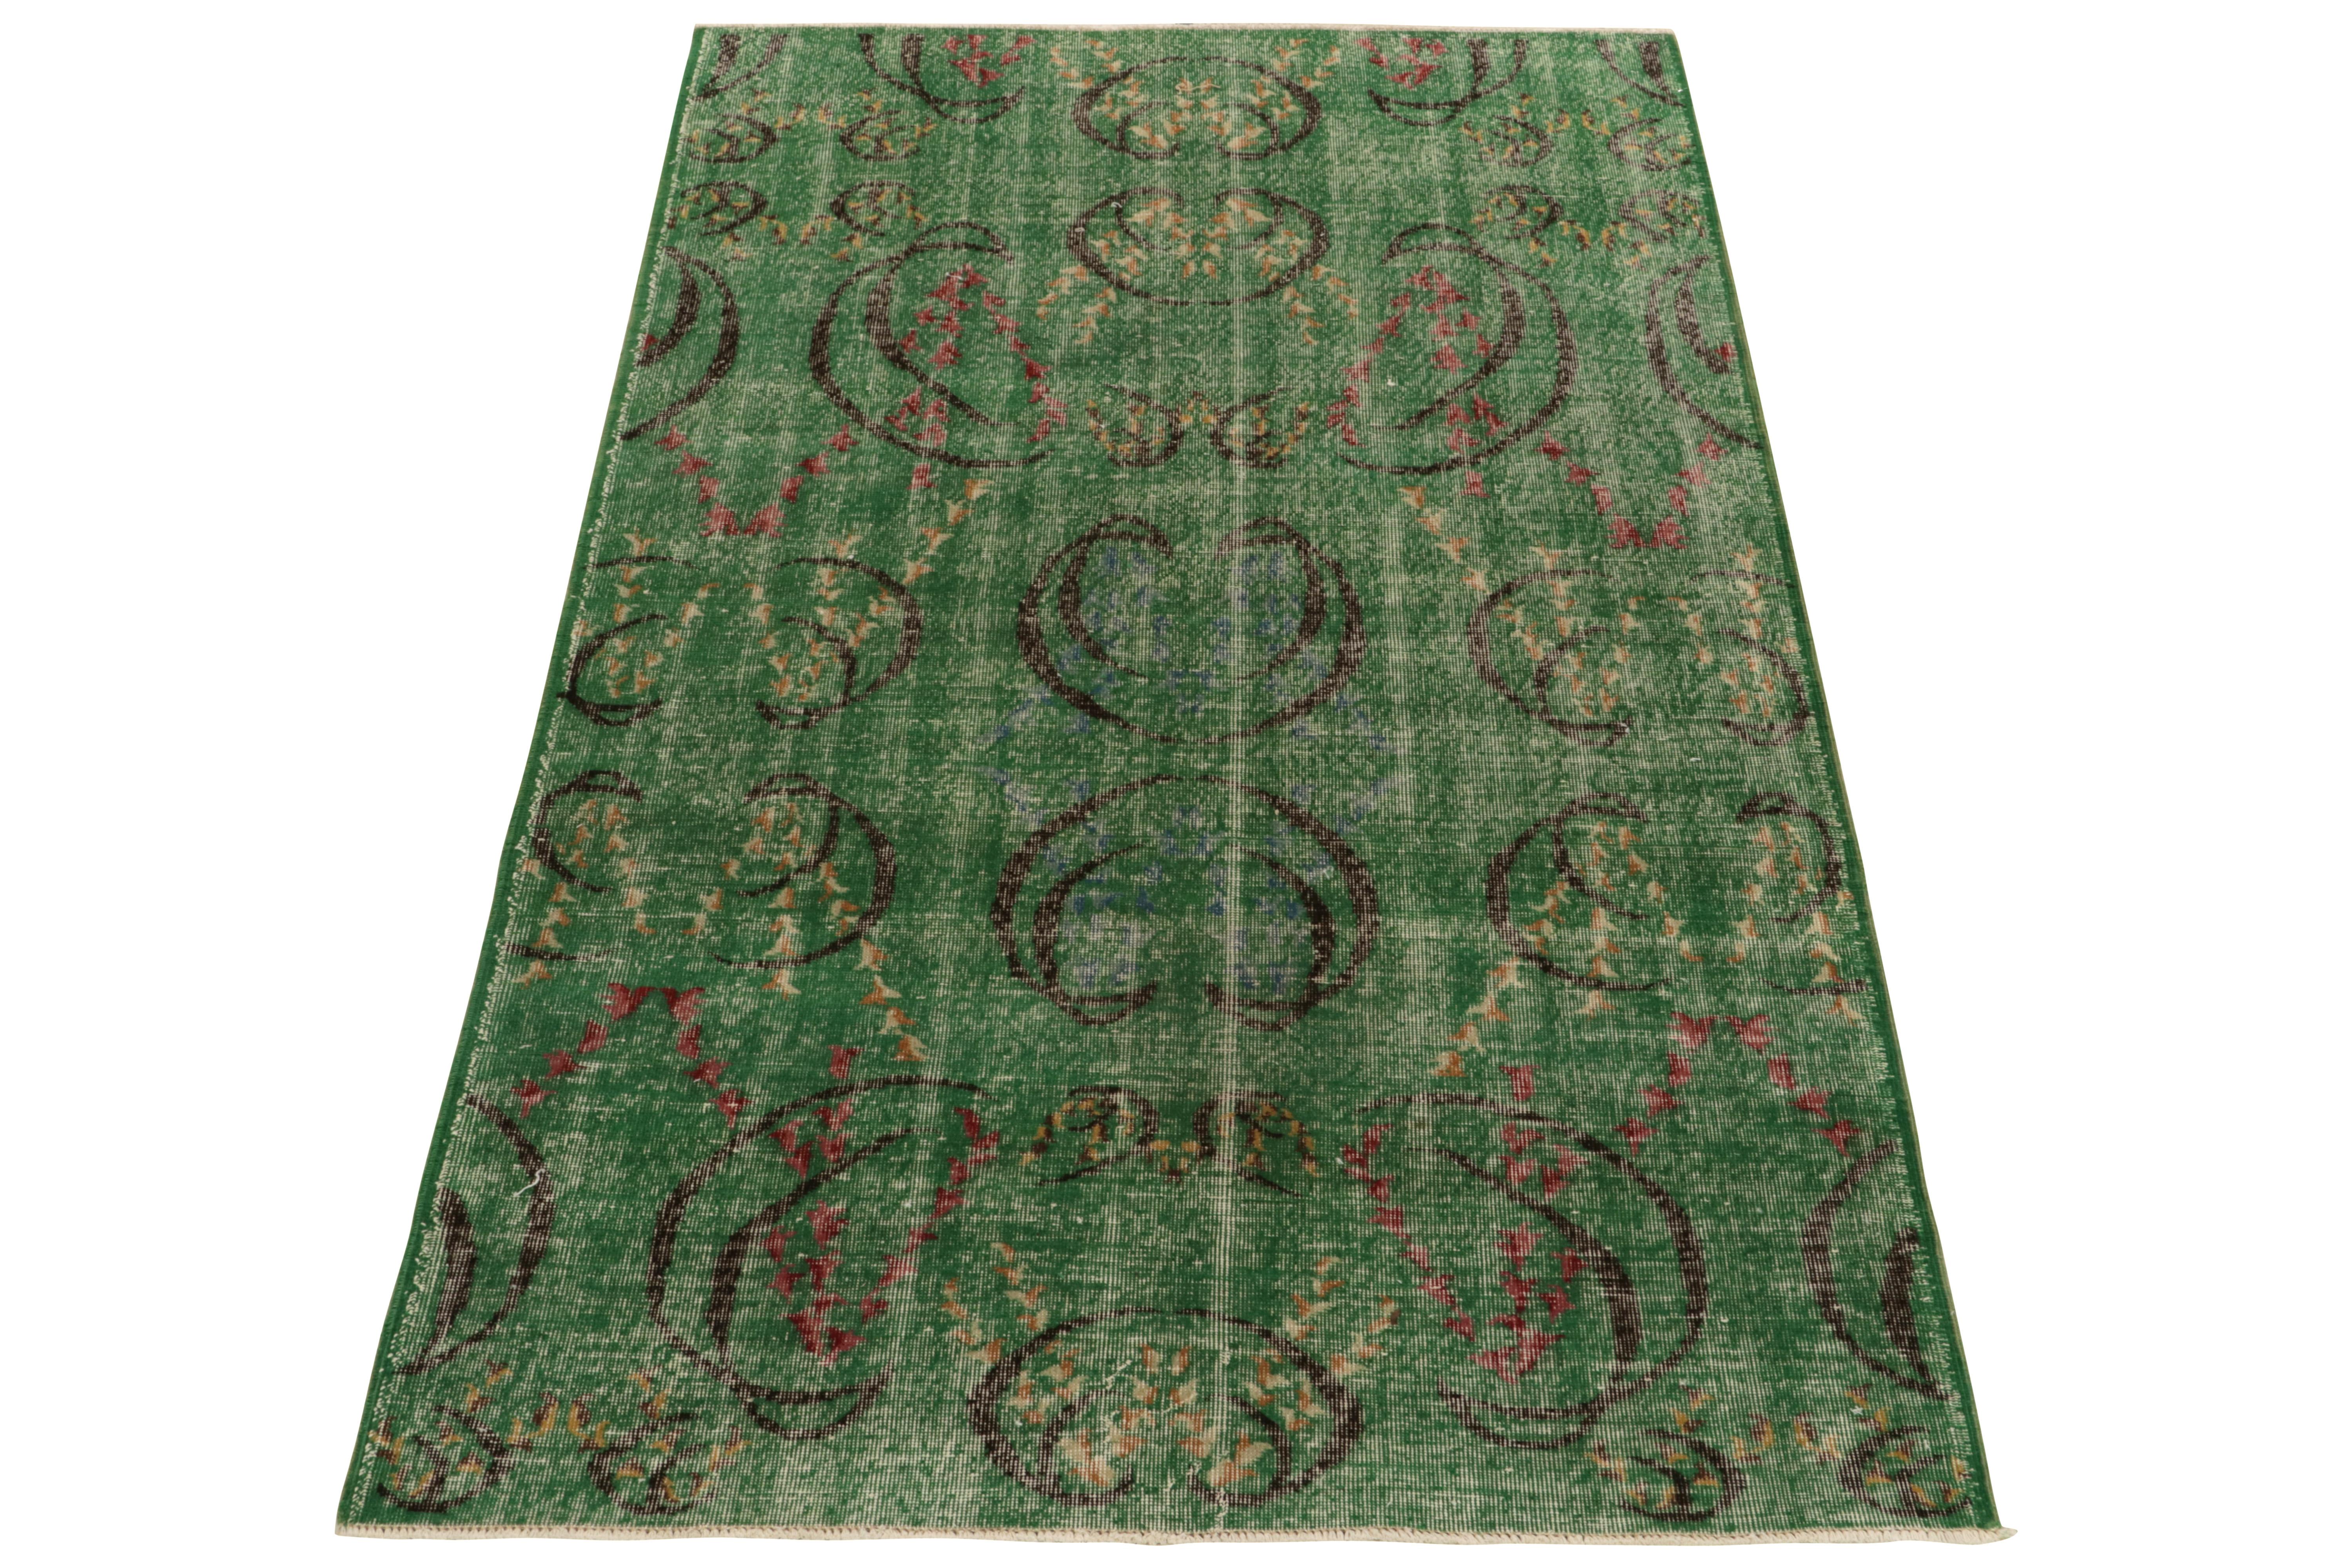 A vintage 5x8 distressed Art Deco rug, hand-knotted in wool circa 1960-1970. Joining Rug & Kilim’s Mid-Century Pasha Collection, commemorating a bold Turkish multidisciplinary artist of the period known for these low-sheared pile